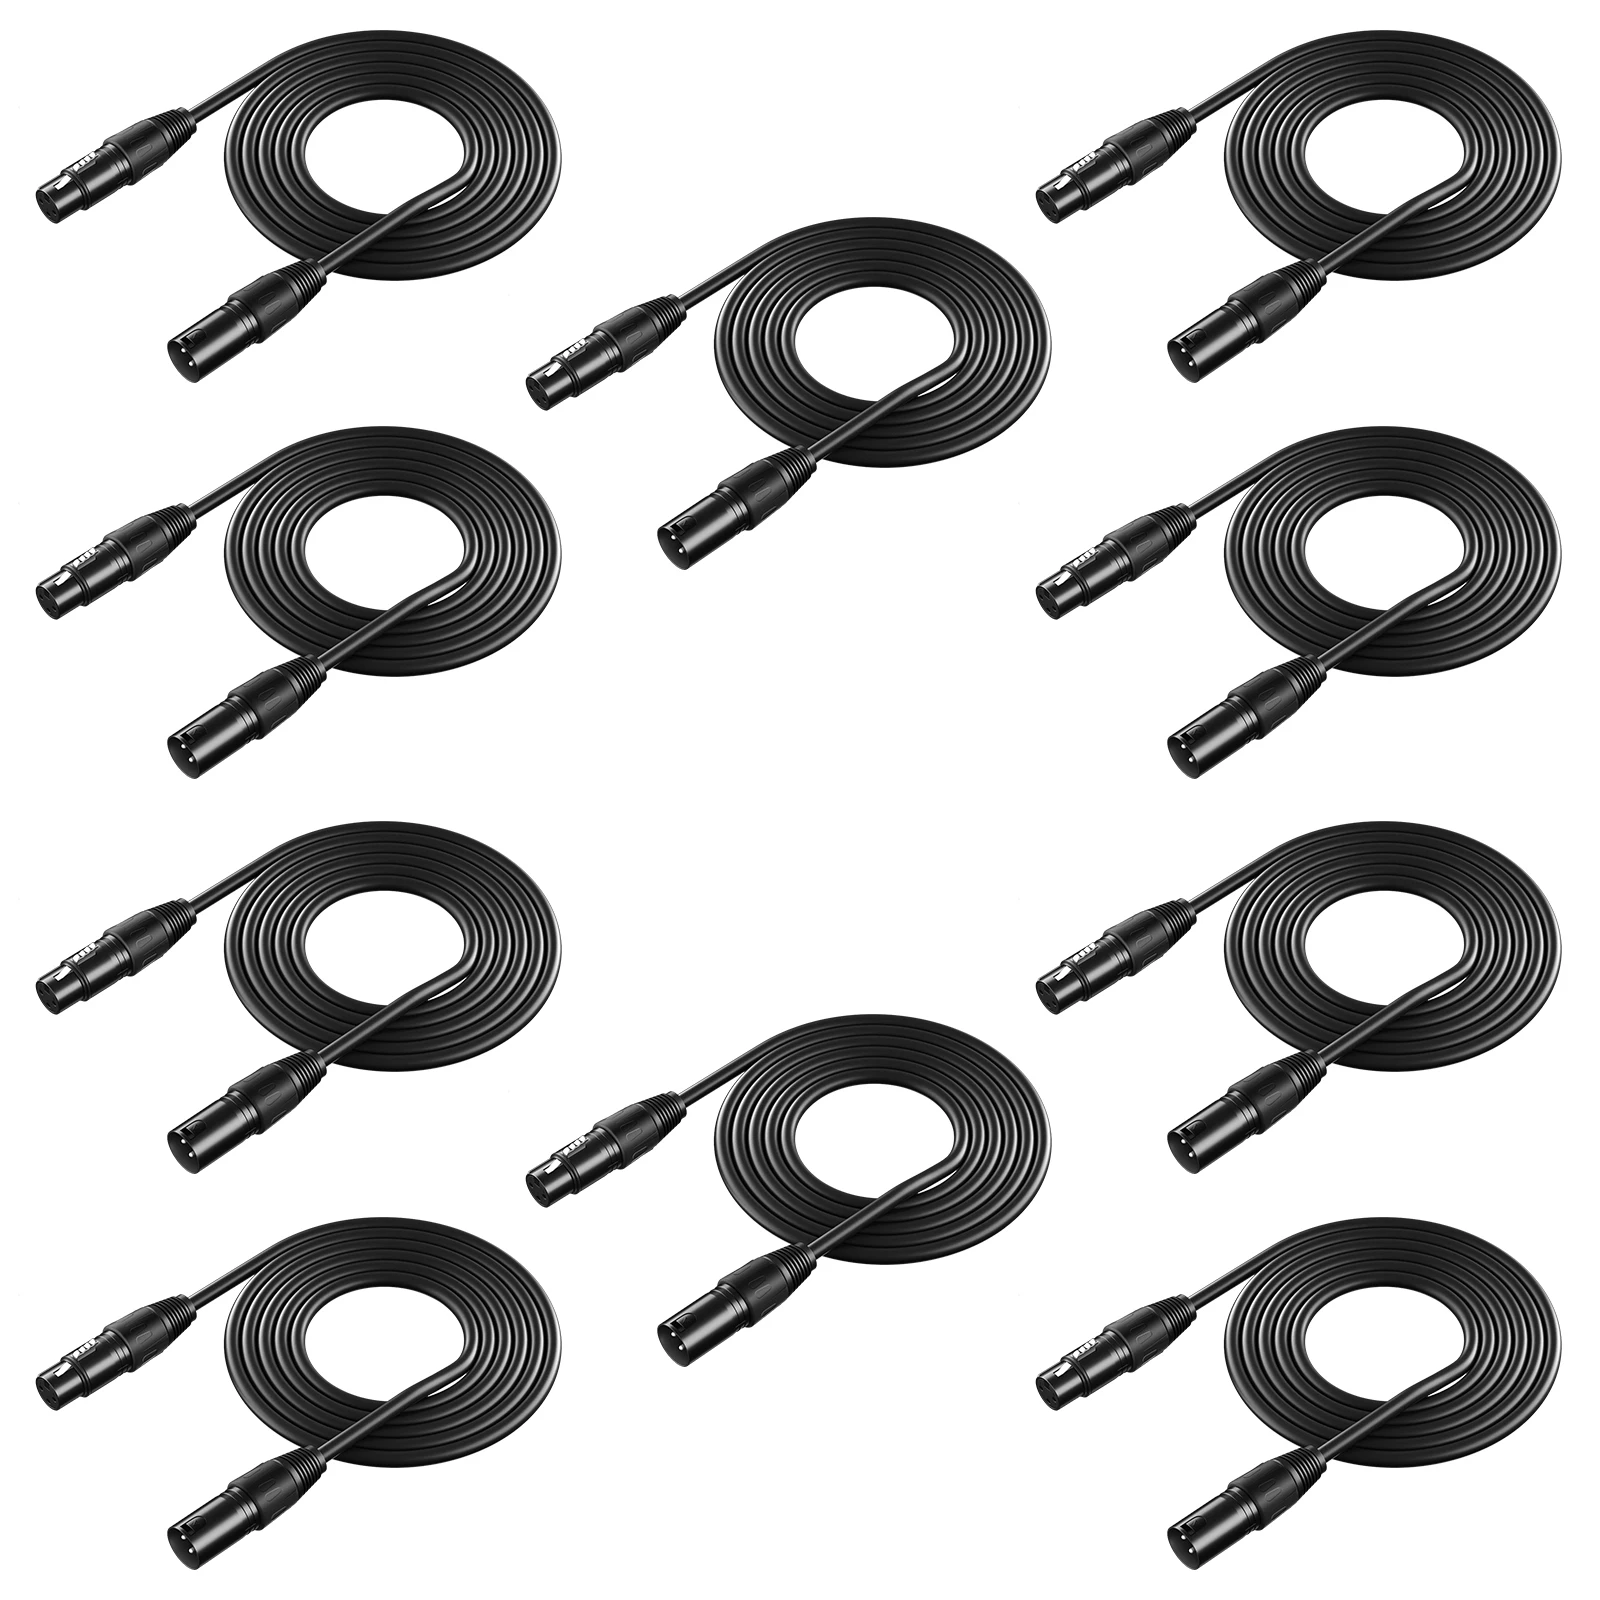 

Neewer 10-Pack 6.5 Foot / 2M DMX Stage Light Cables Wires 3-Pin Signal XLR Male to Female Connection for Moving Head